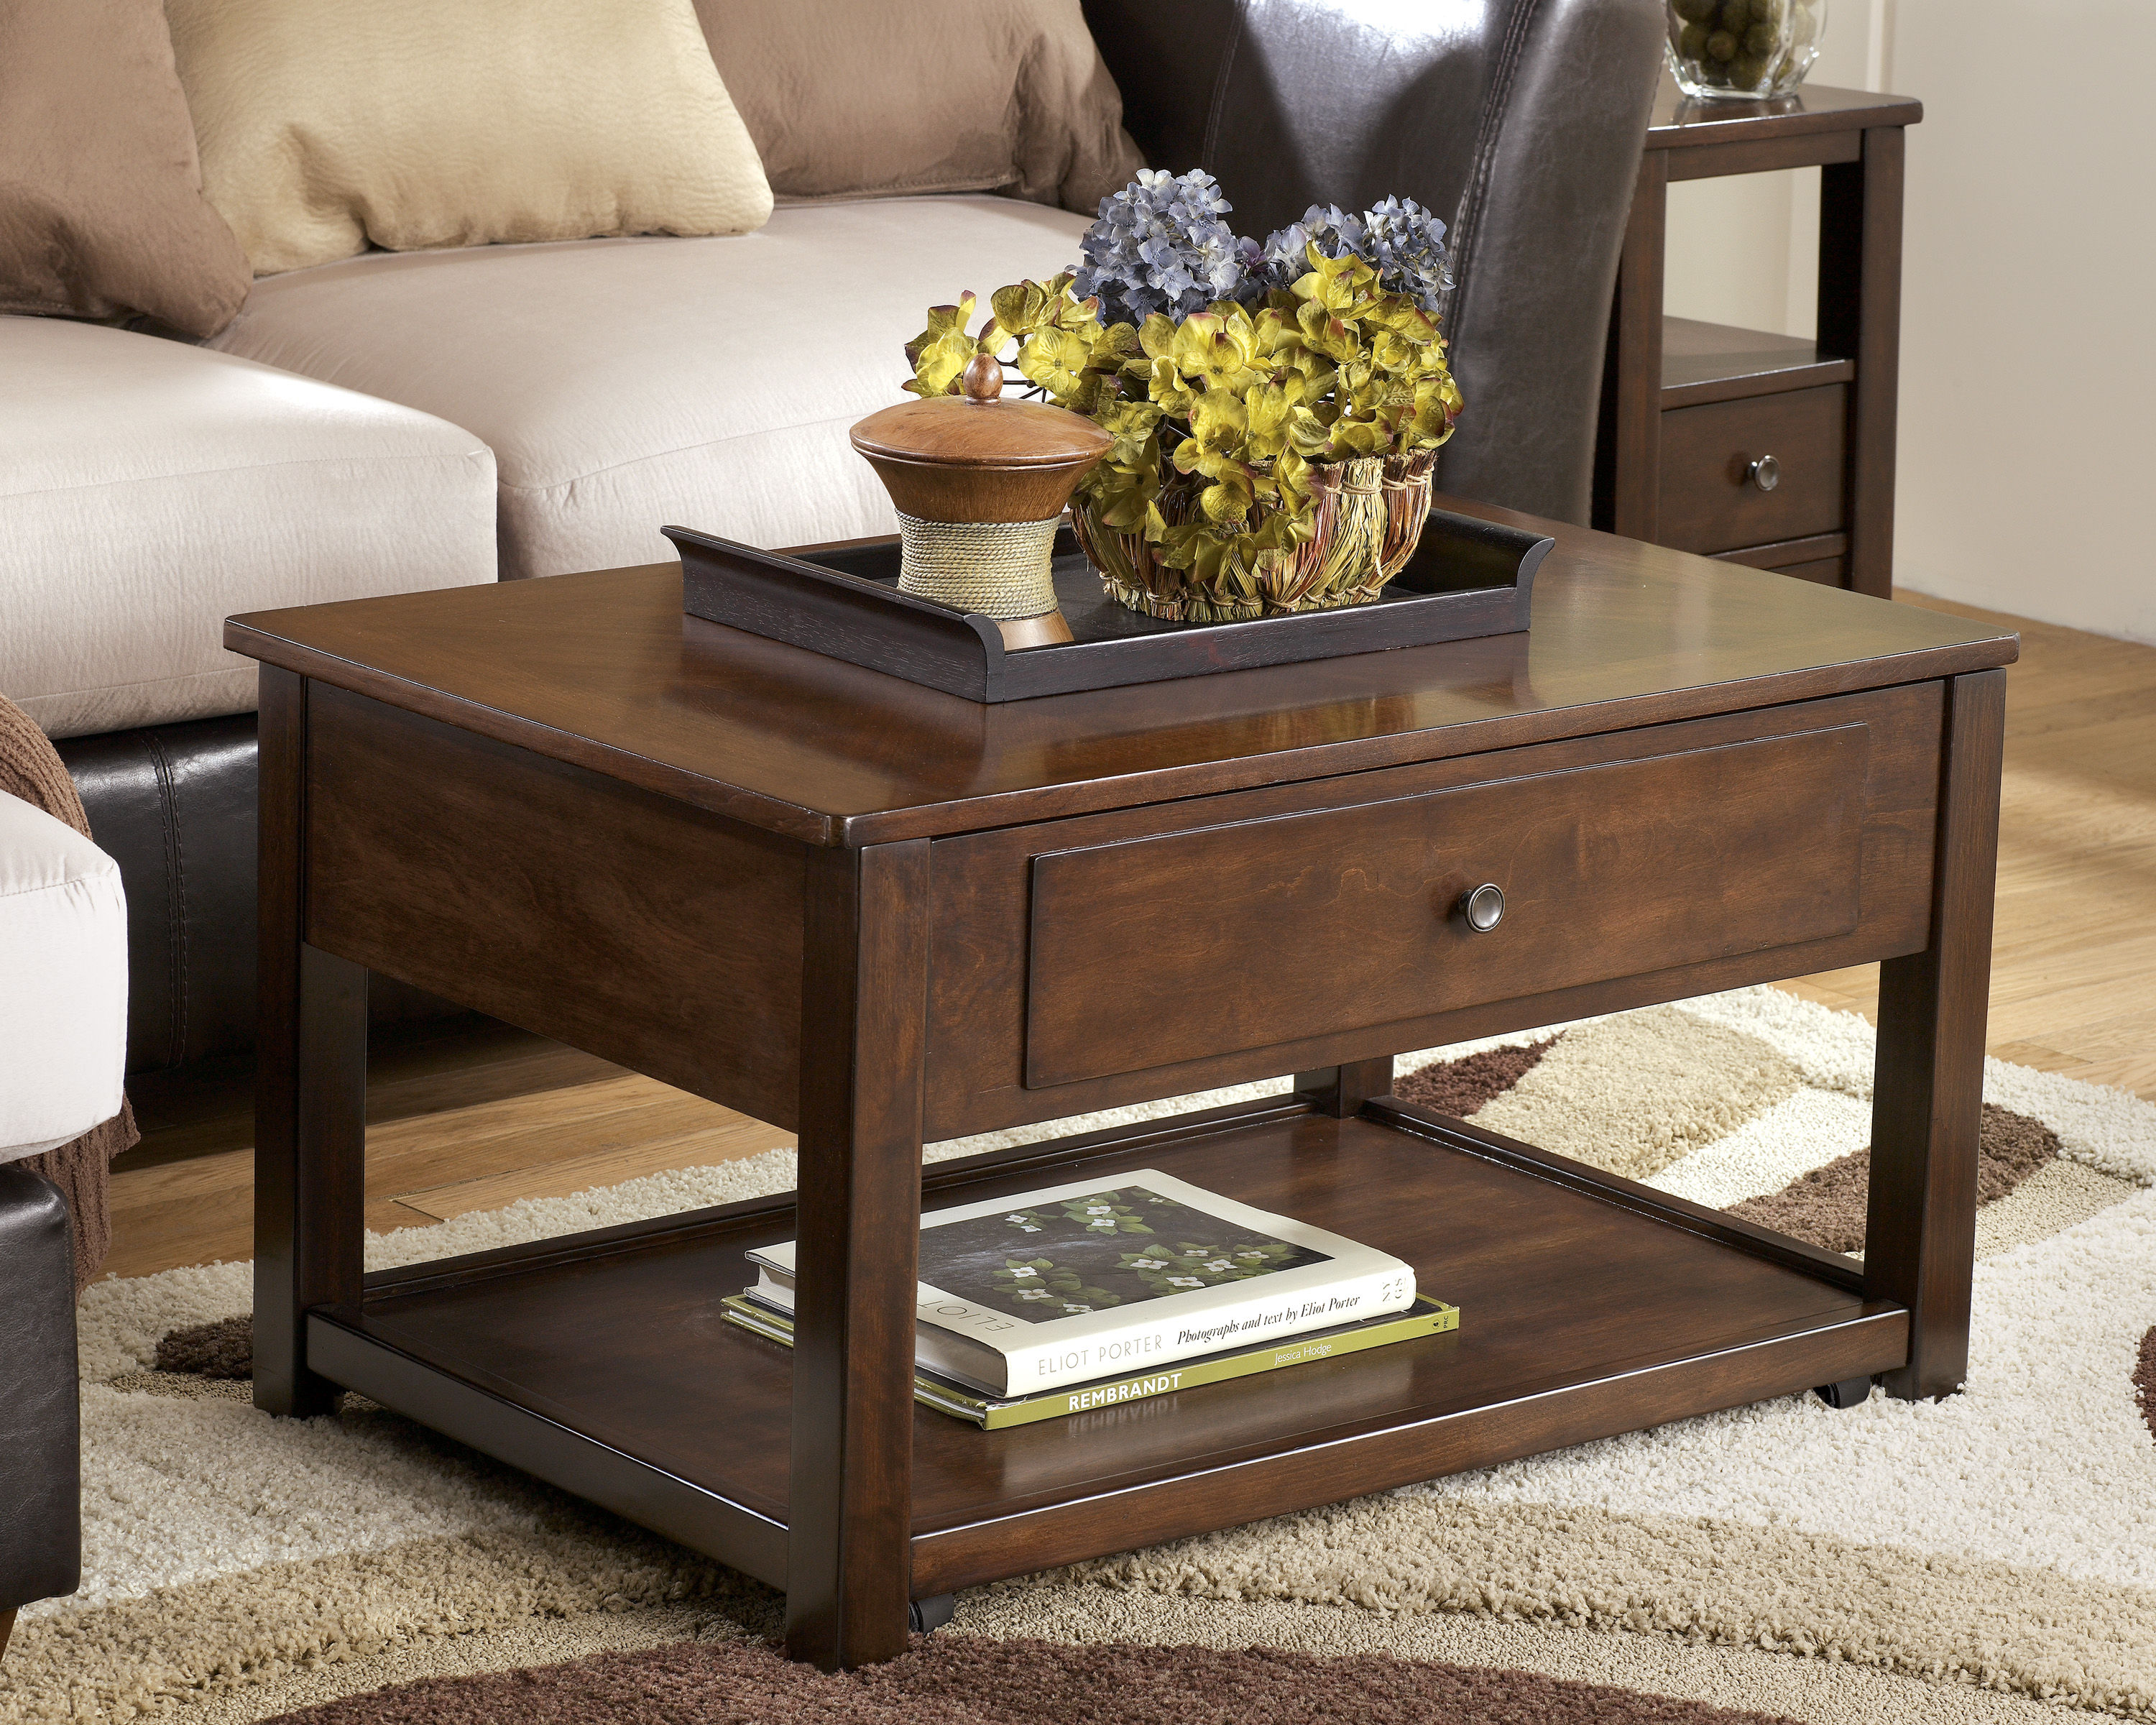 ashley furniture marion dark brown lift top cocktail table the coffee and end tables click enlarge hampton bay patio vintage pedestal folding wood bedside cabinets bedroom toronto